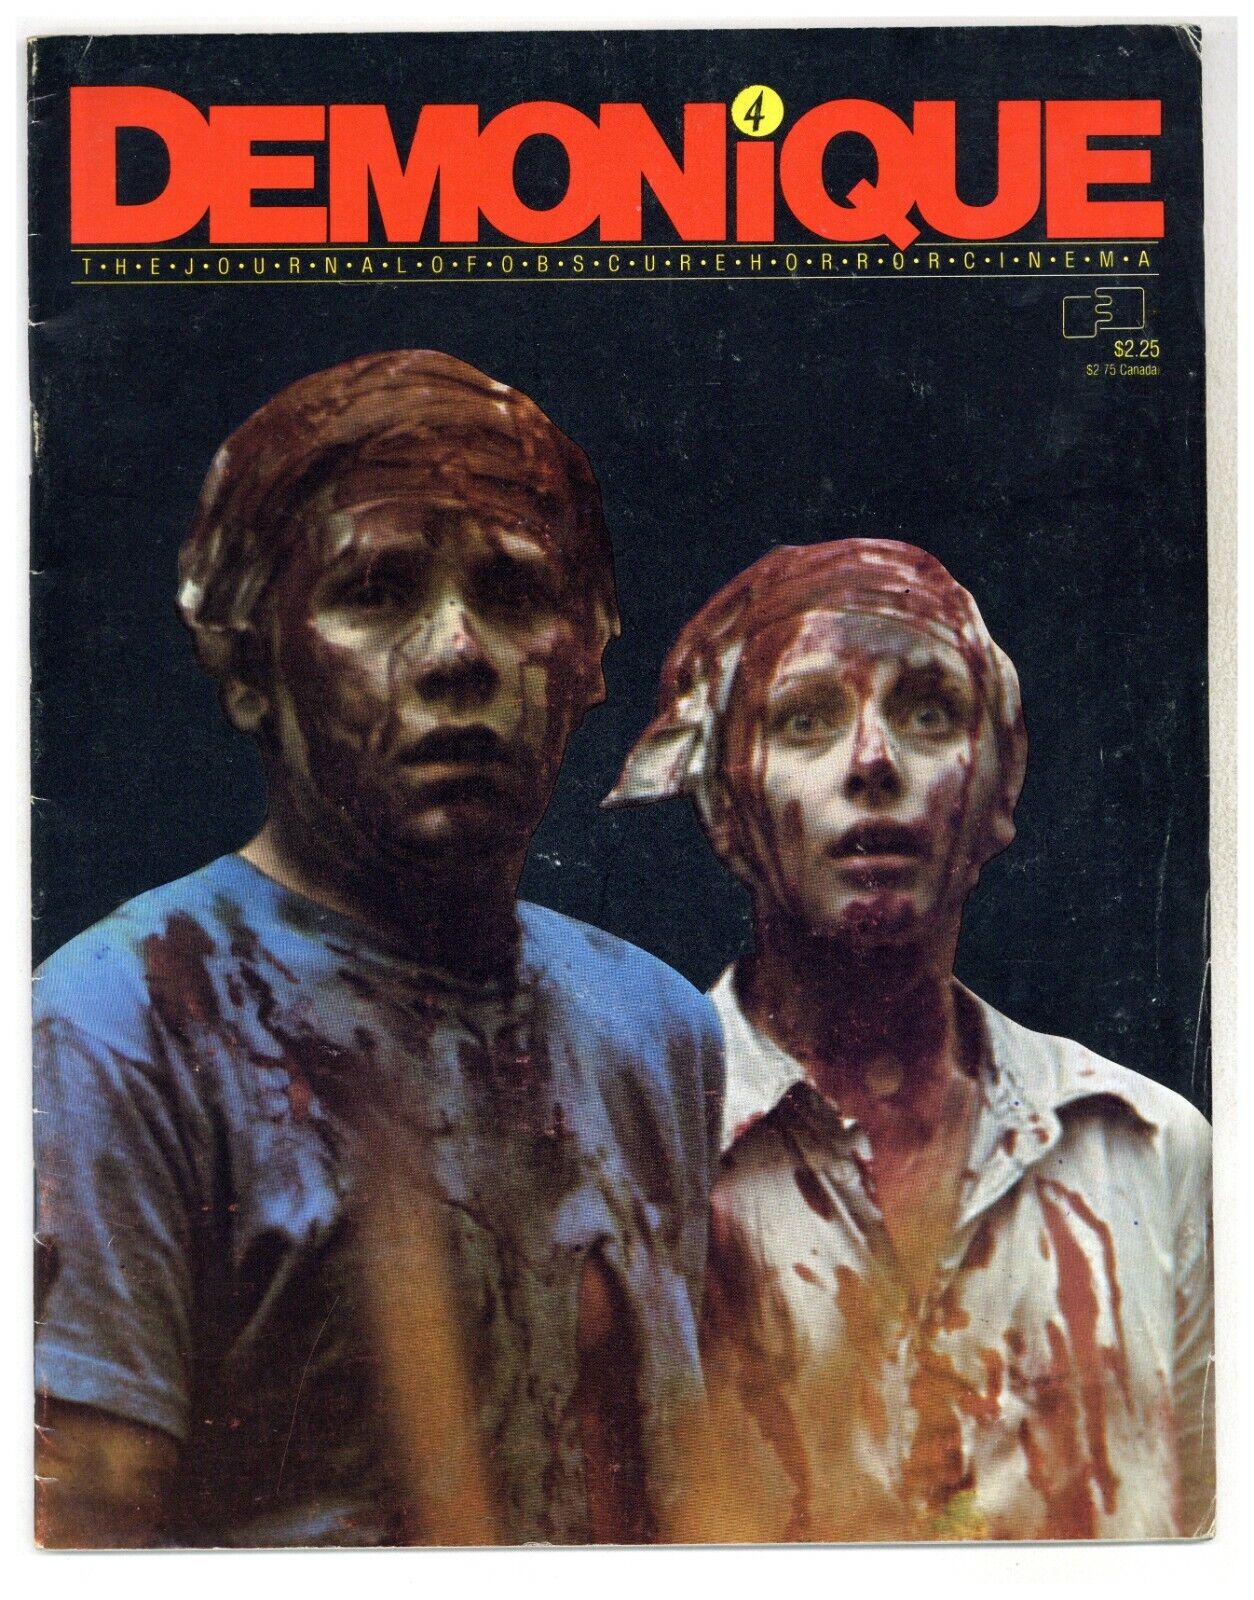 Demonique 4 Journal of Obscure Horror Cinema Blood on Satan\'s Claw etc 1983 F342